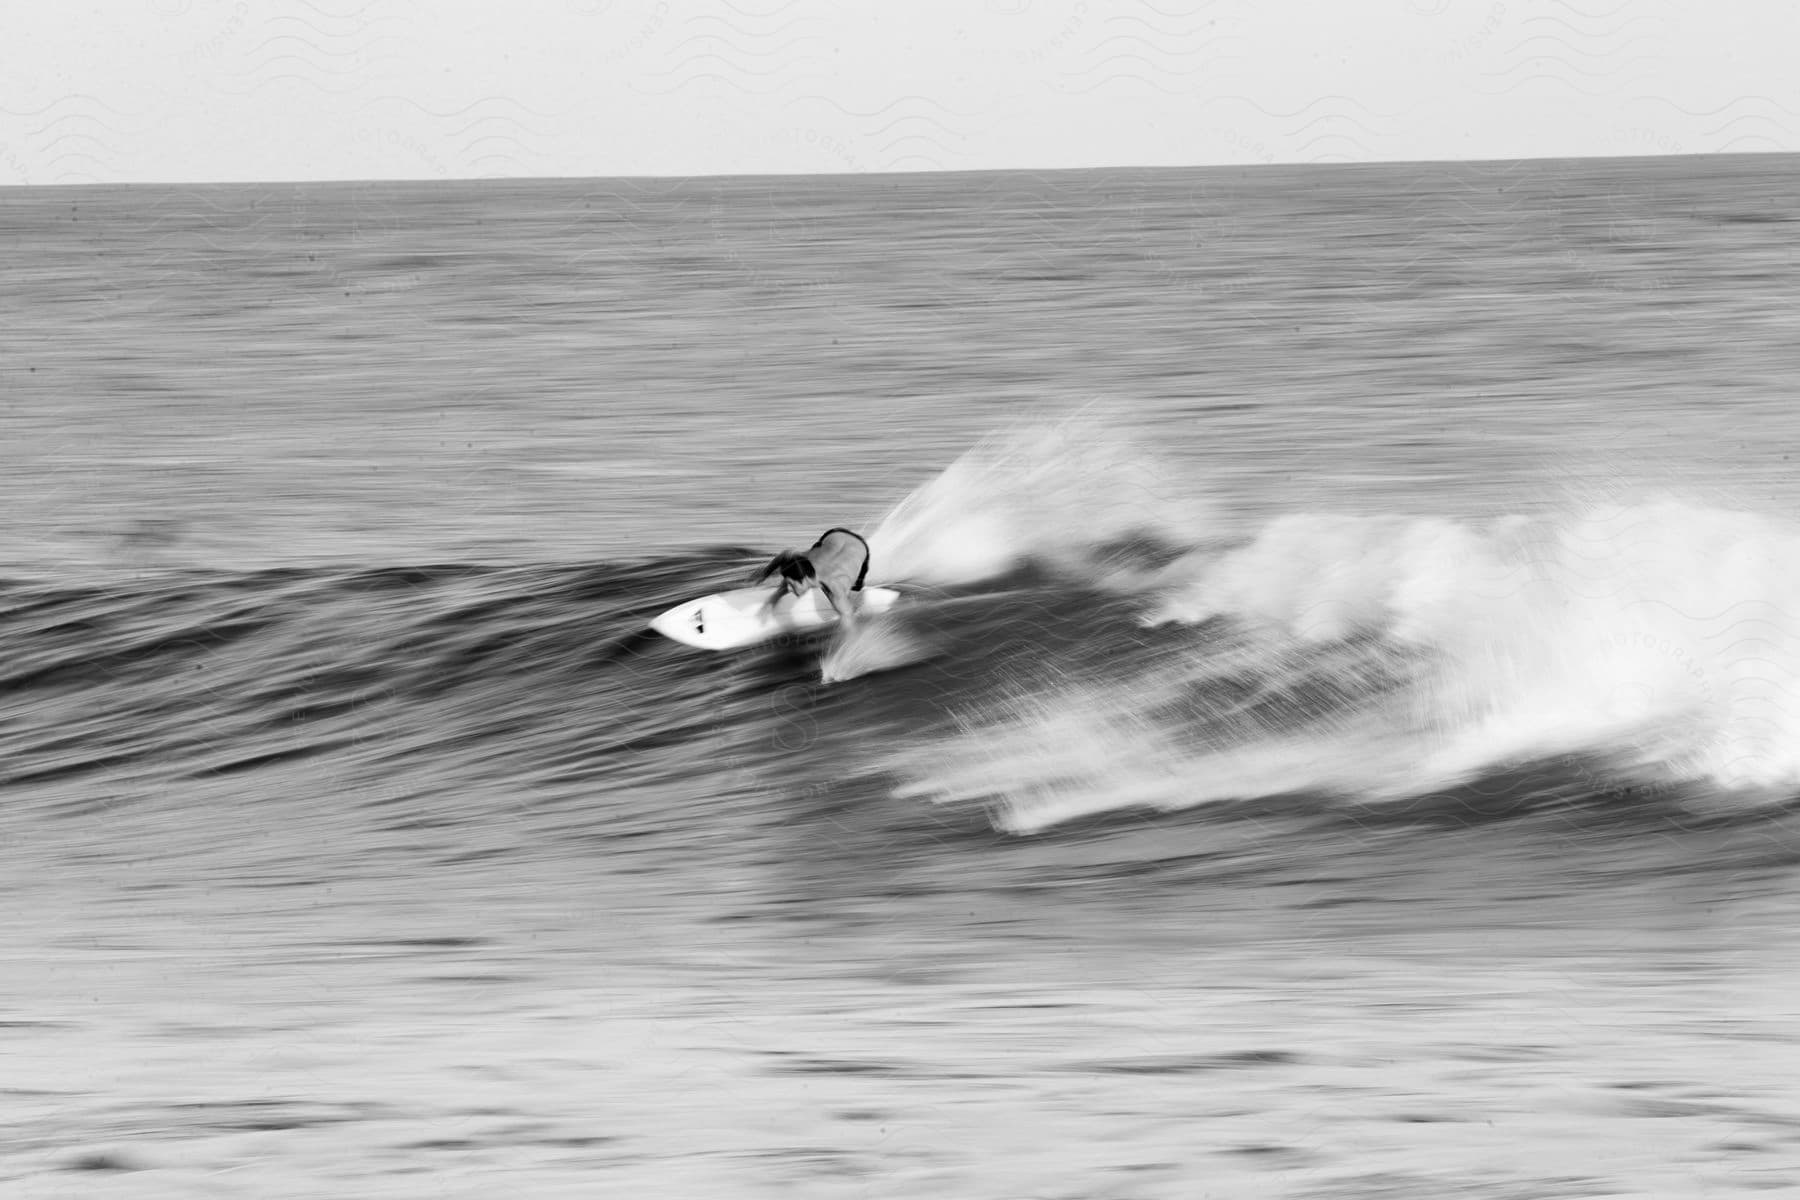 A man surfs on a wave in black and white